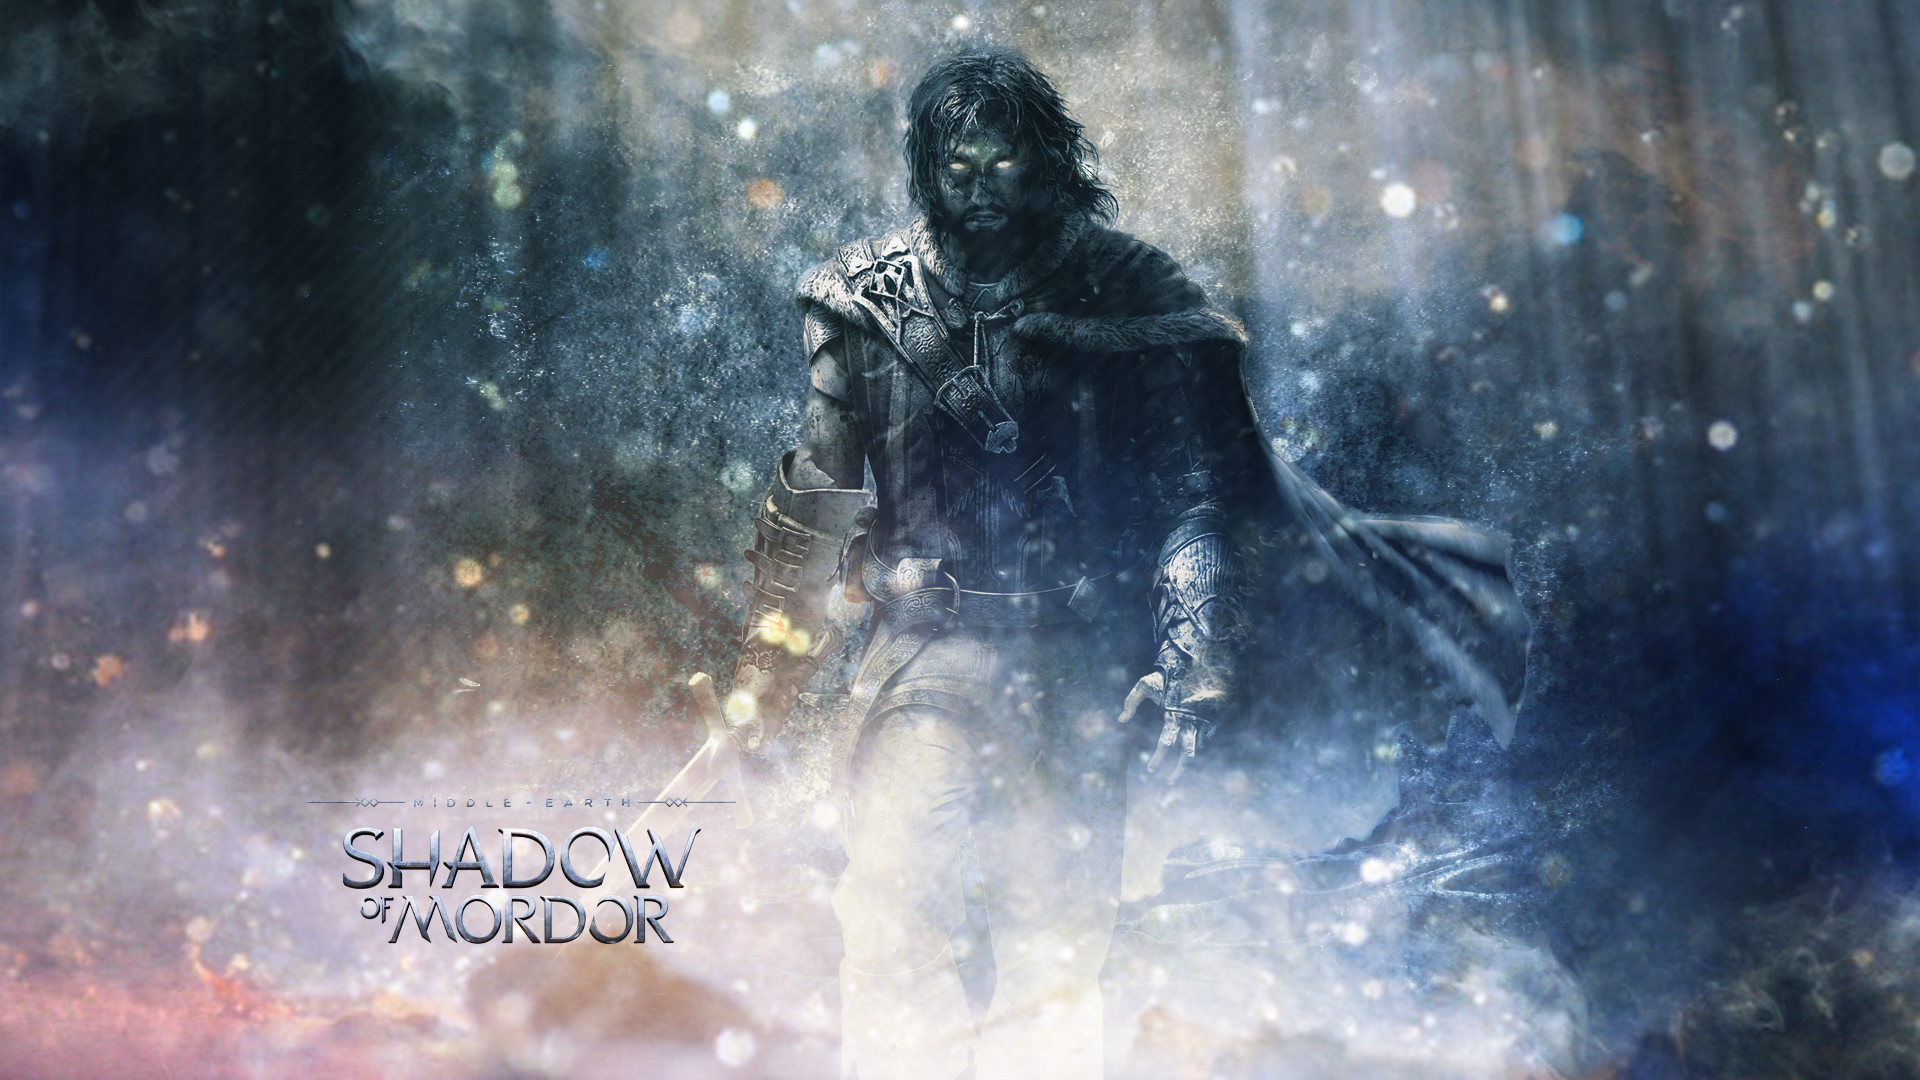 Middle Earth Shadow of Mordor by Noc21 on DeviantArt